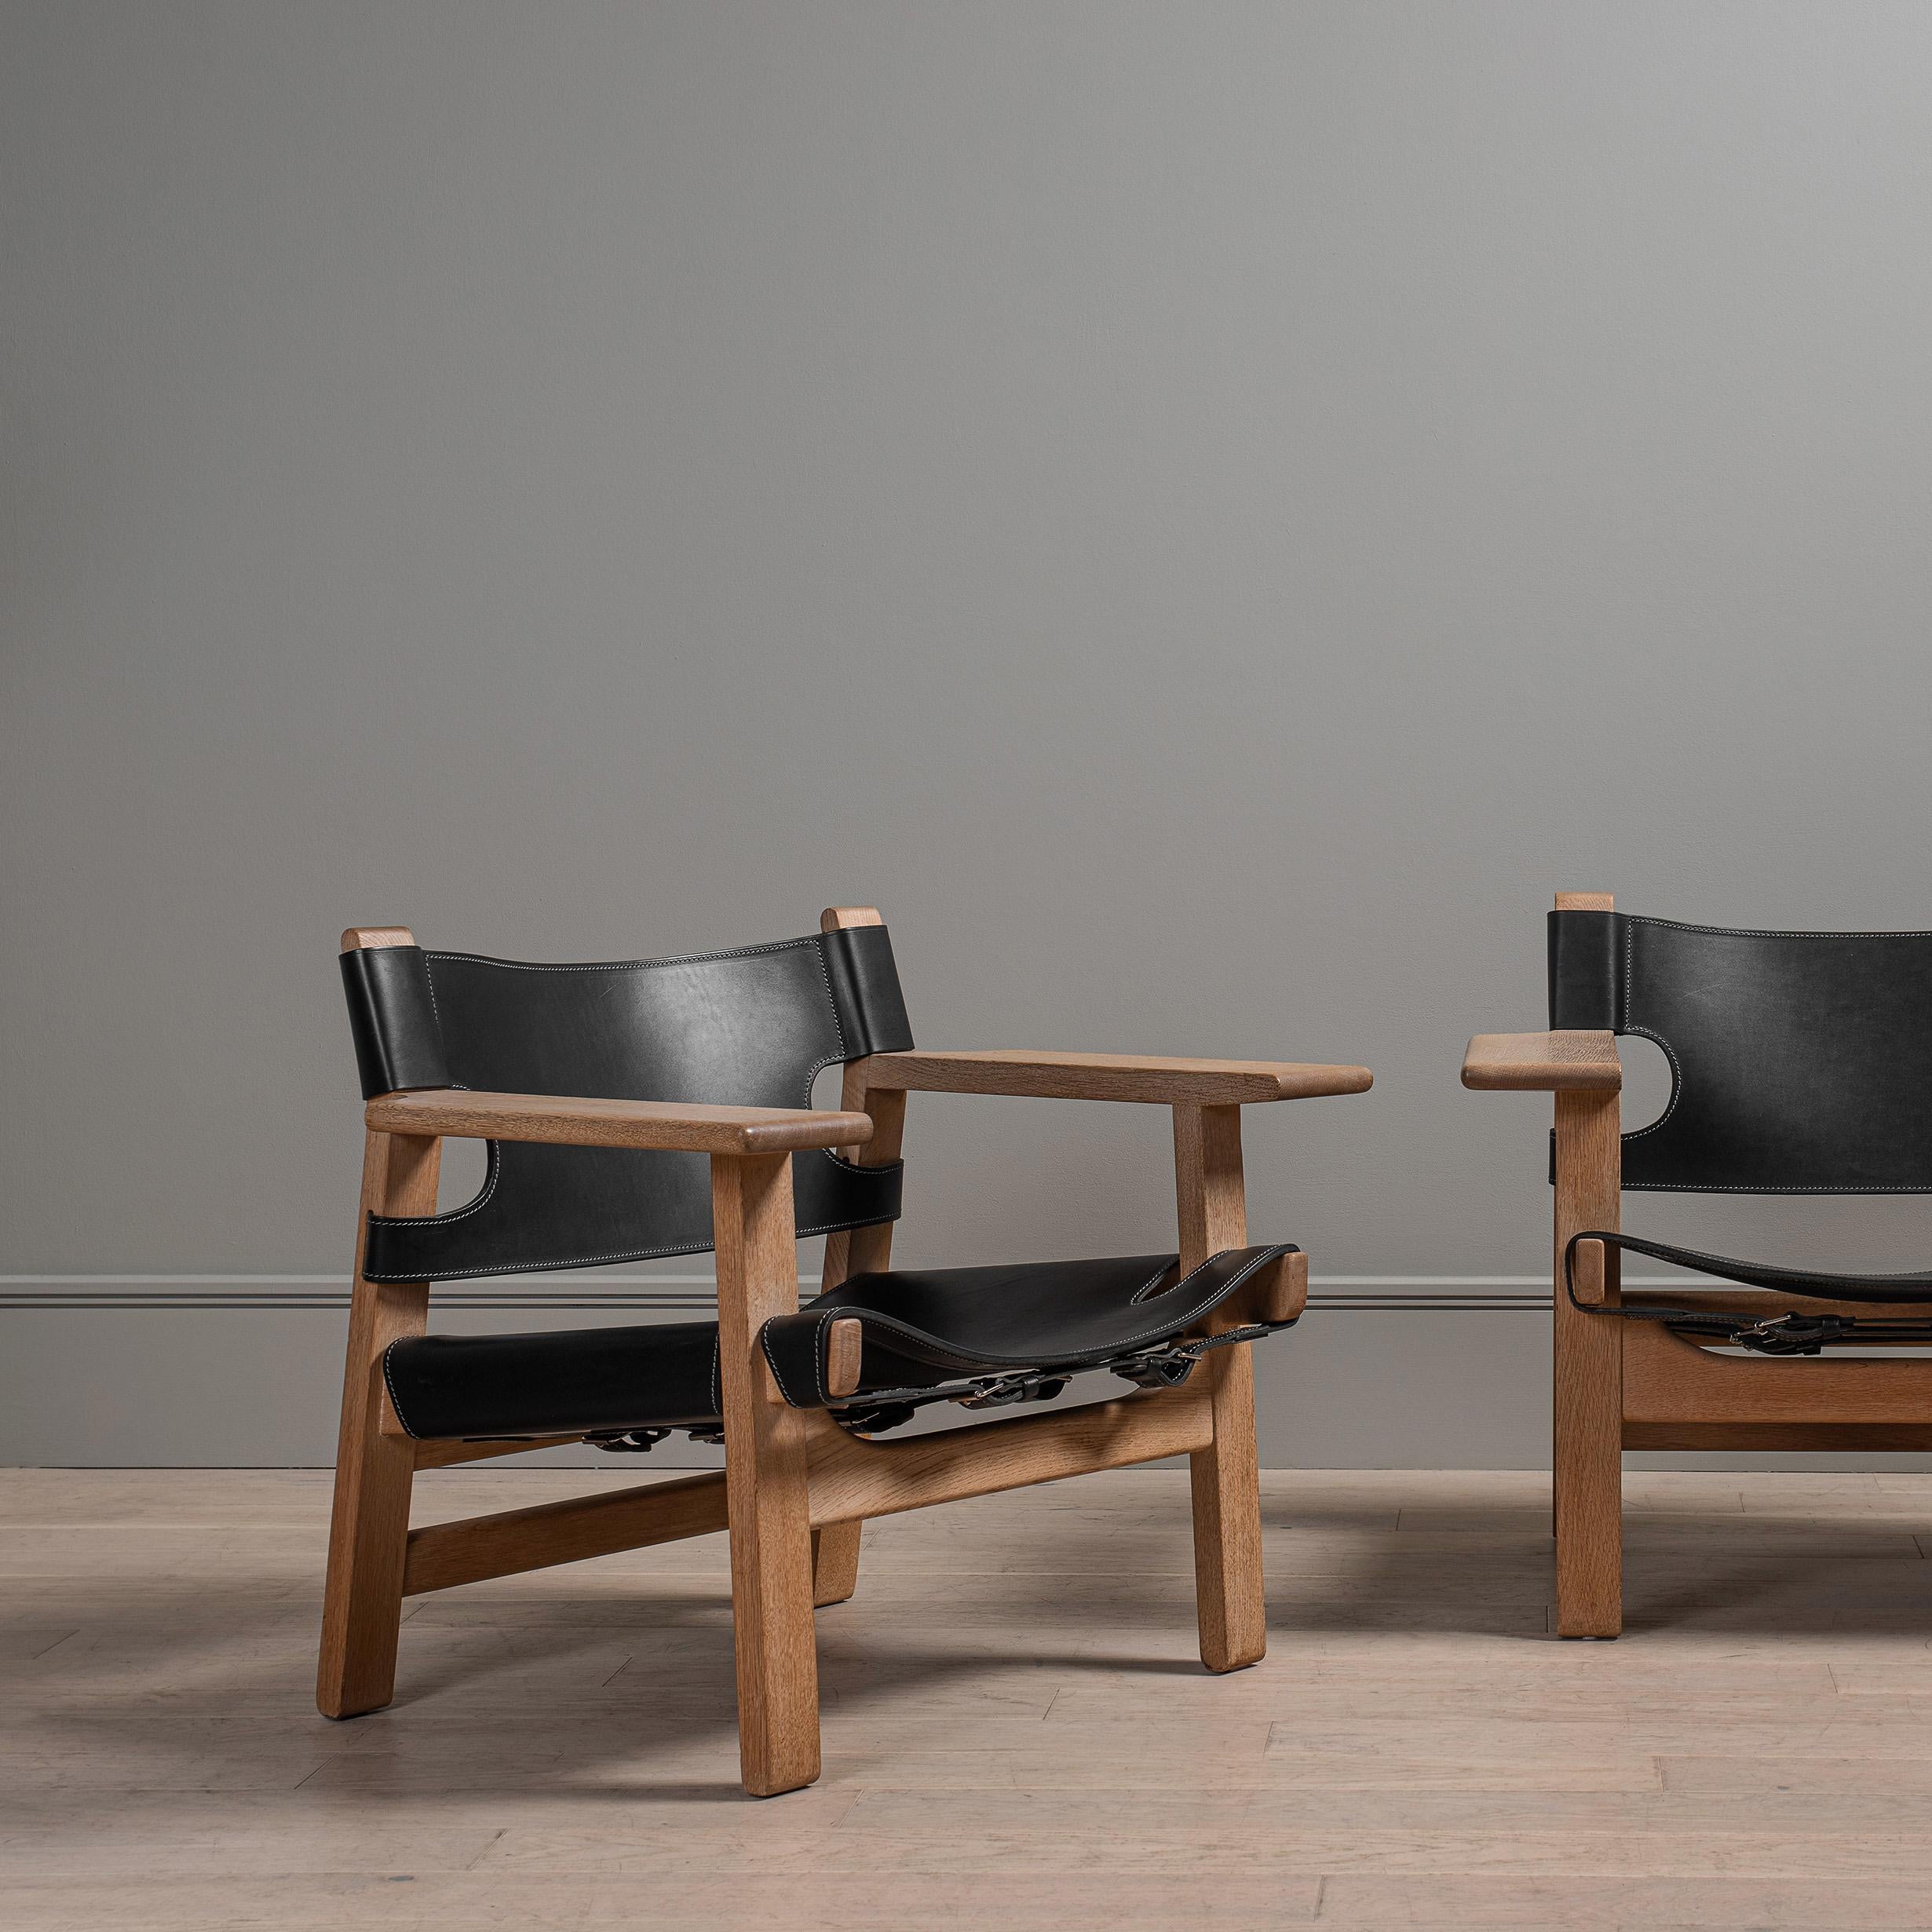 The Spanish chair by Borge Mogensen 1958. One of his greatest and widely acclaimed designs. These are the original versions from the Fredericia manufacturers, disernible by the early frame construction. Solid oak frame with original soap finish in